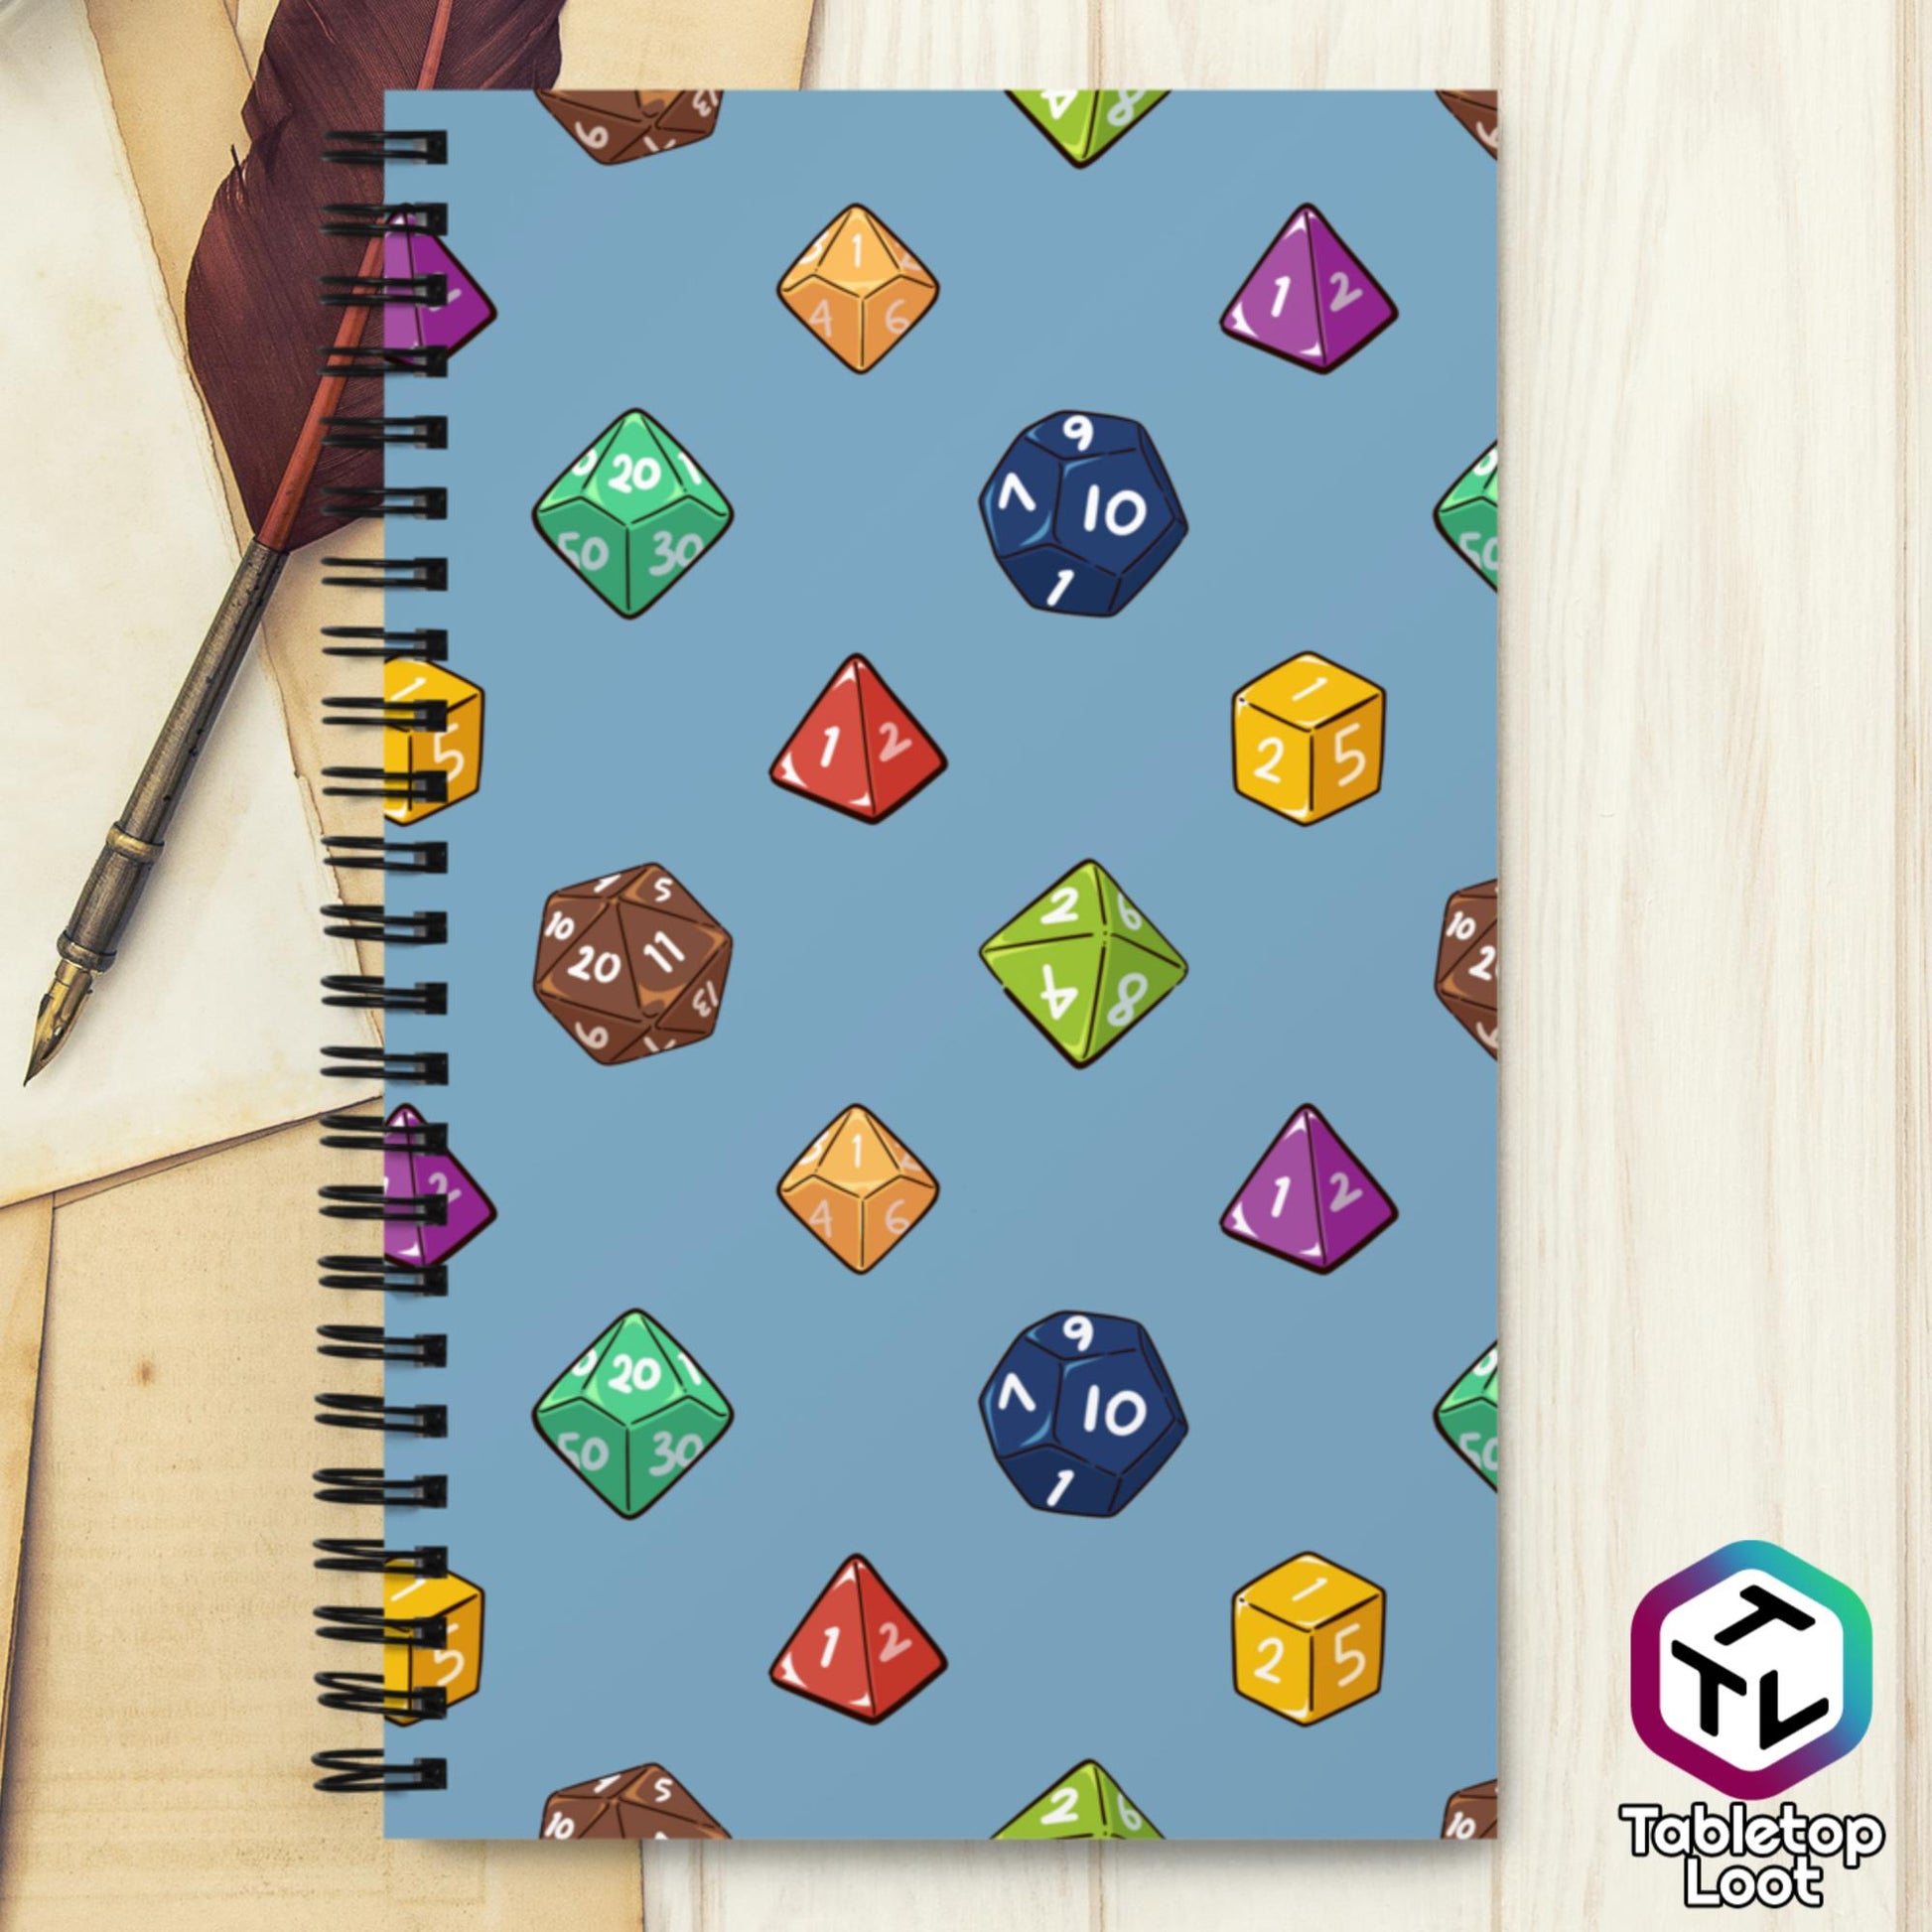 A spiral notebook has a polyhedral dice pattern in red, brown, yellow, teal, blue, and purple on a blue background.